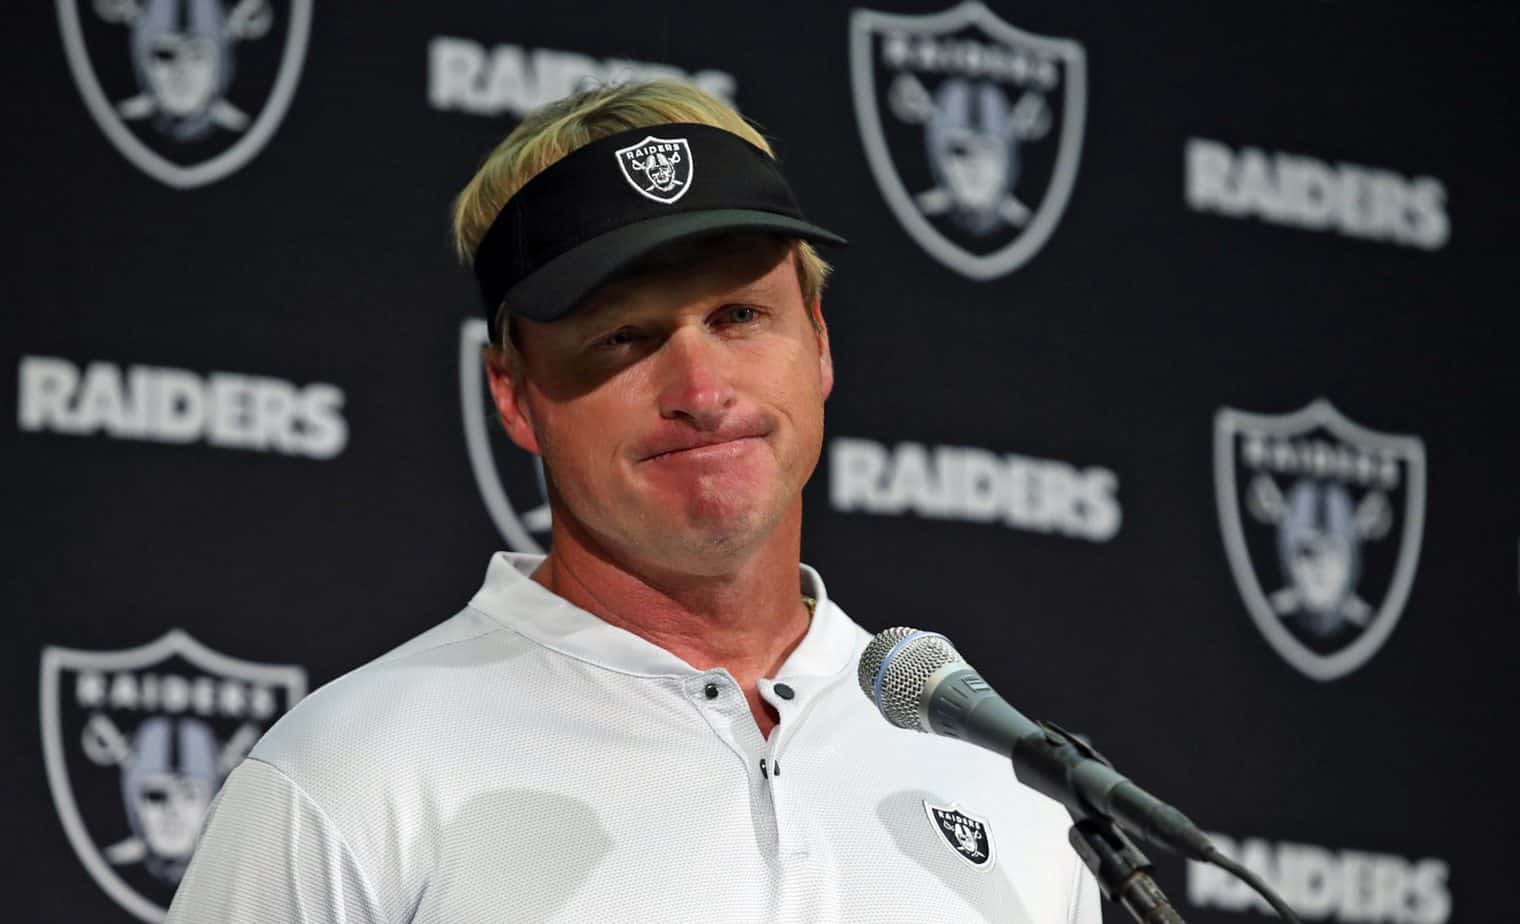 Former Raiders coach Jon Gruden broke his silence to declare that "the truth will come out" from his email leak scandal that took his job